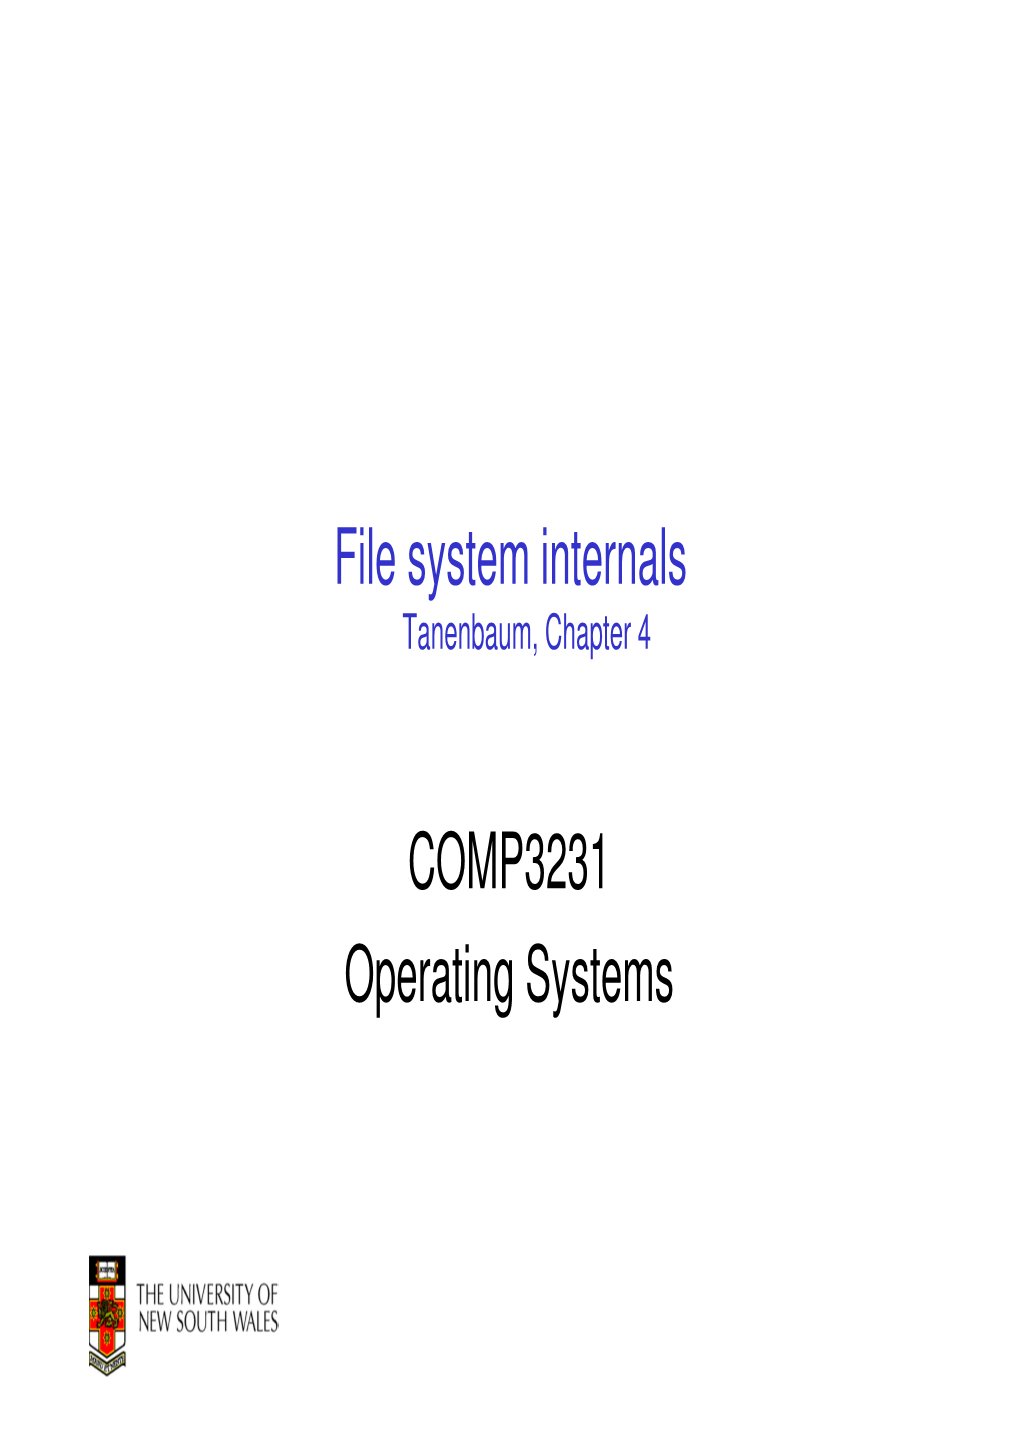 File System Internals COMP3231 Operating Systems